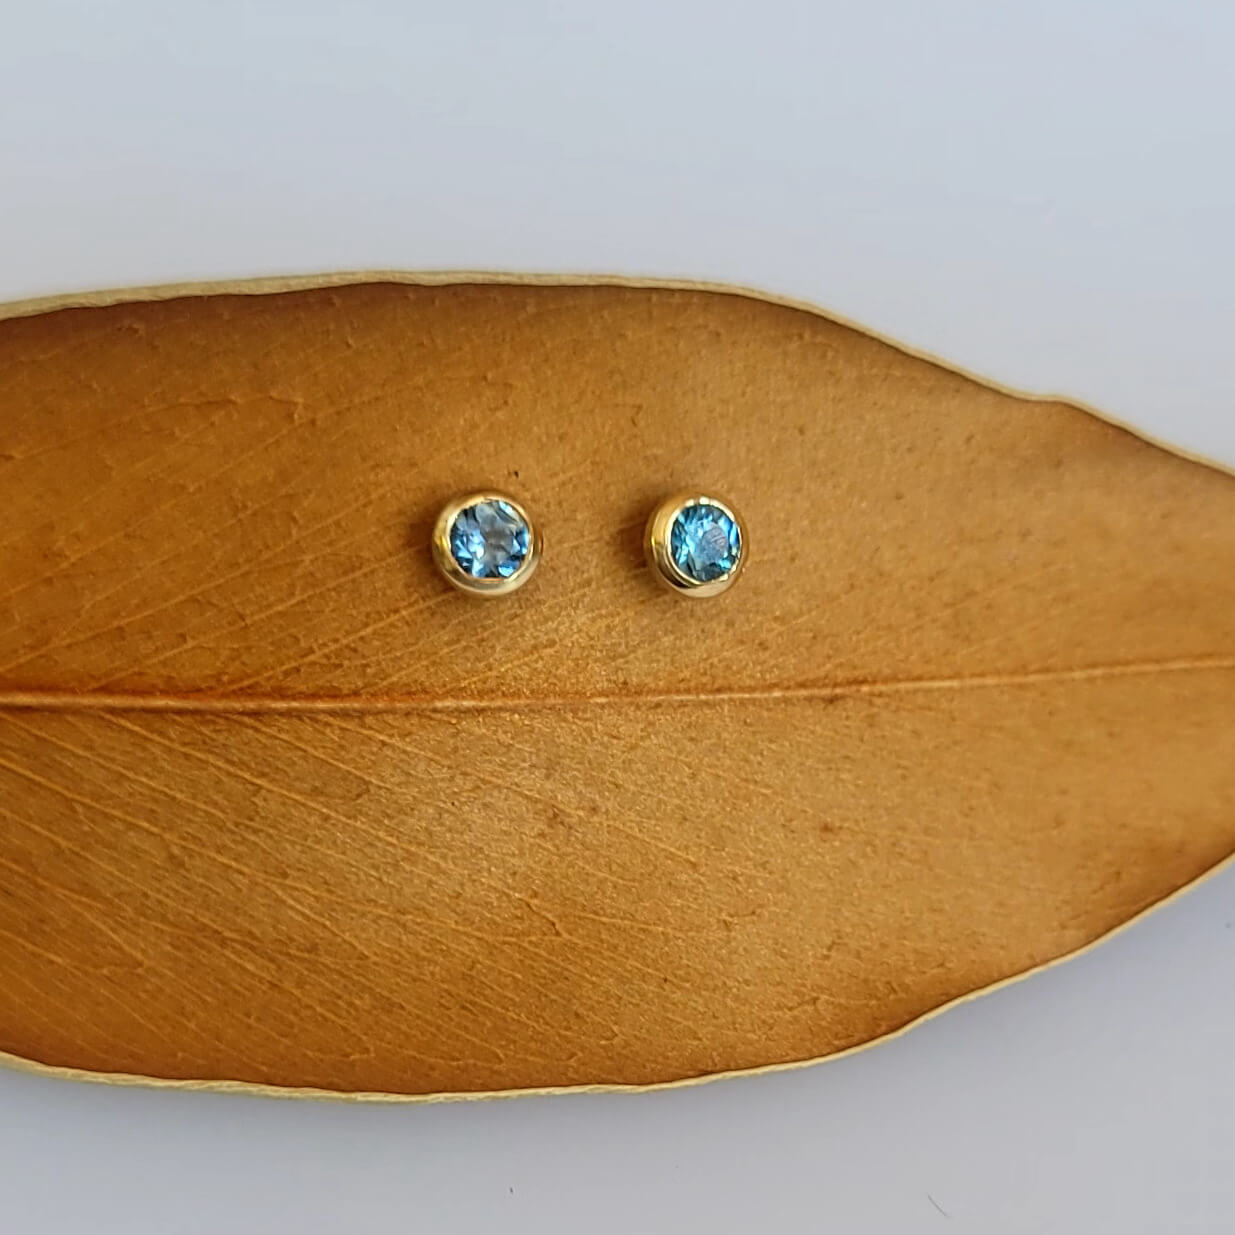 Montana sapphire stud earrings in recycled yellow gold martini settings. Handmade by EC Design Jewelry in Minneapolis, MN.